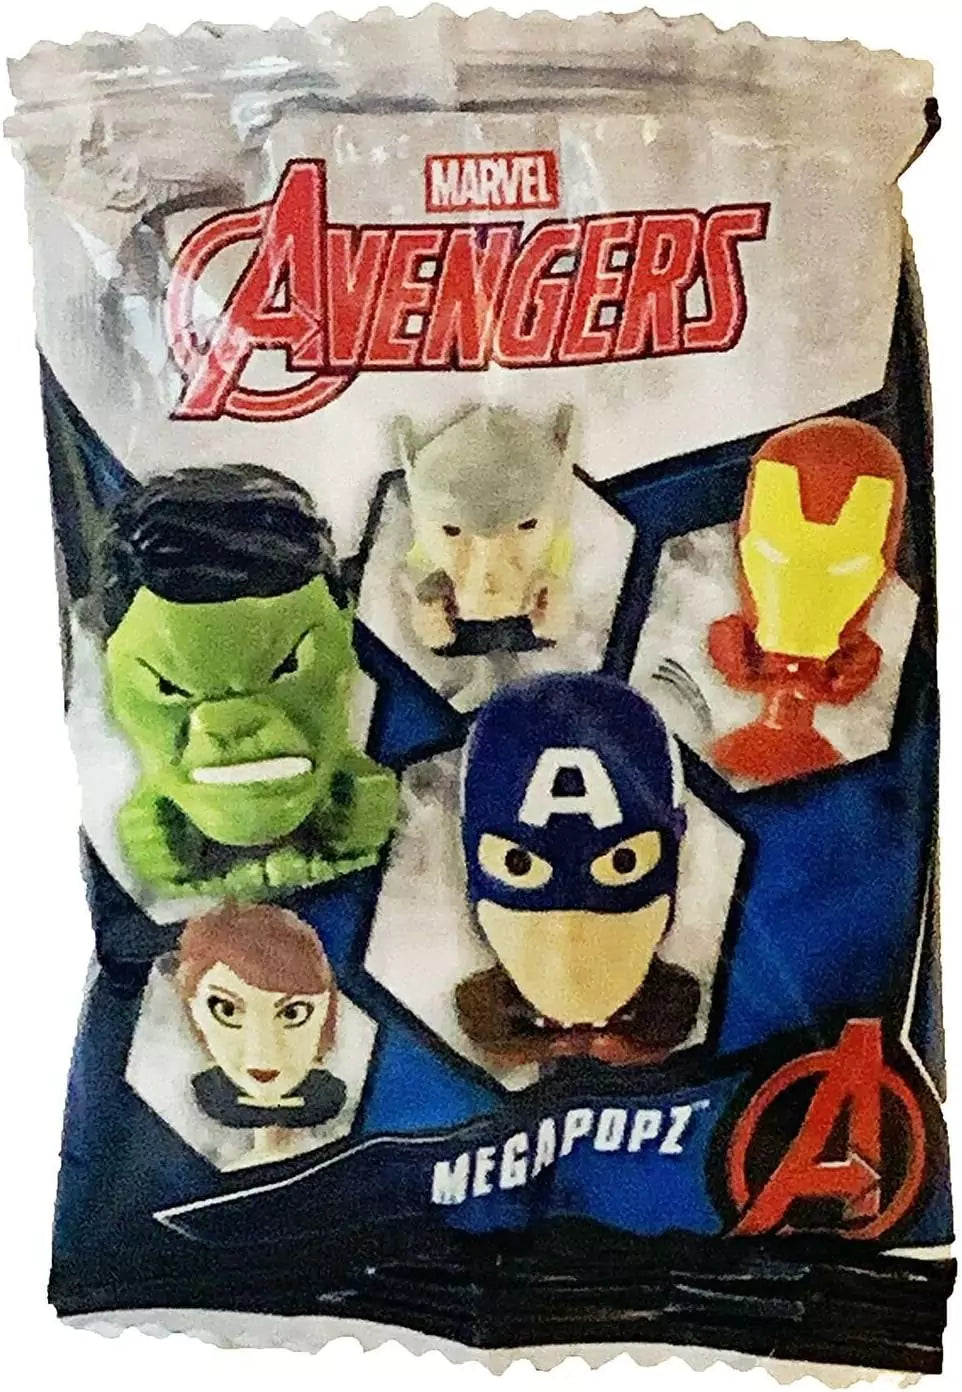 Marvel Avengers Megapopz Collectable Figure Heads Blind Party Bags 50 Pack - Toptoys2u